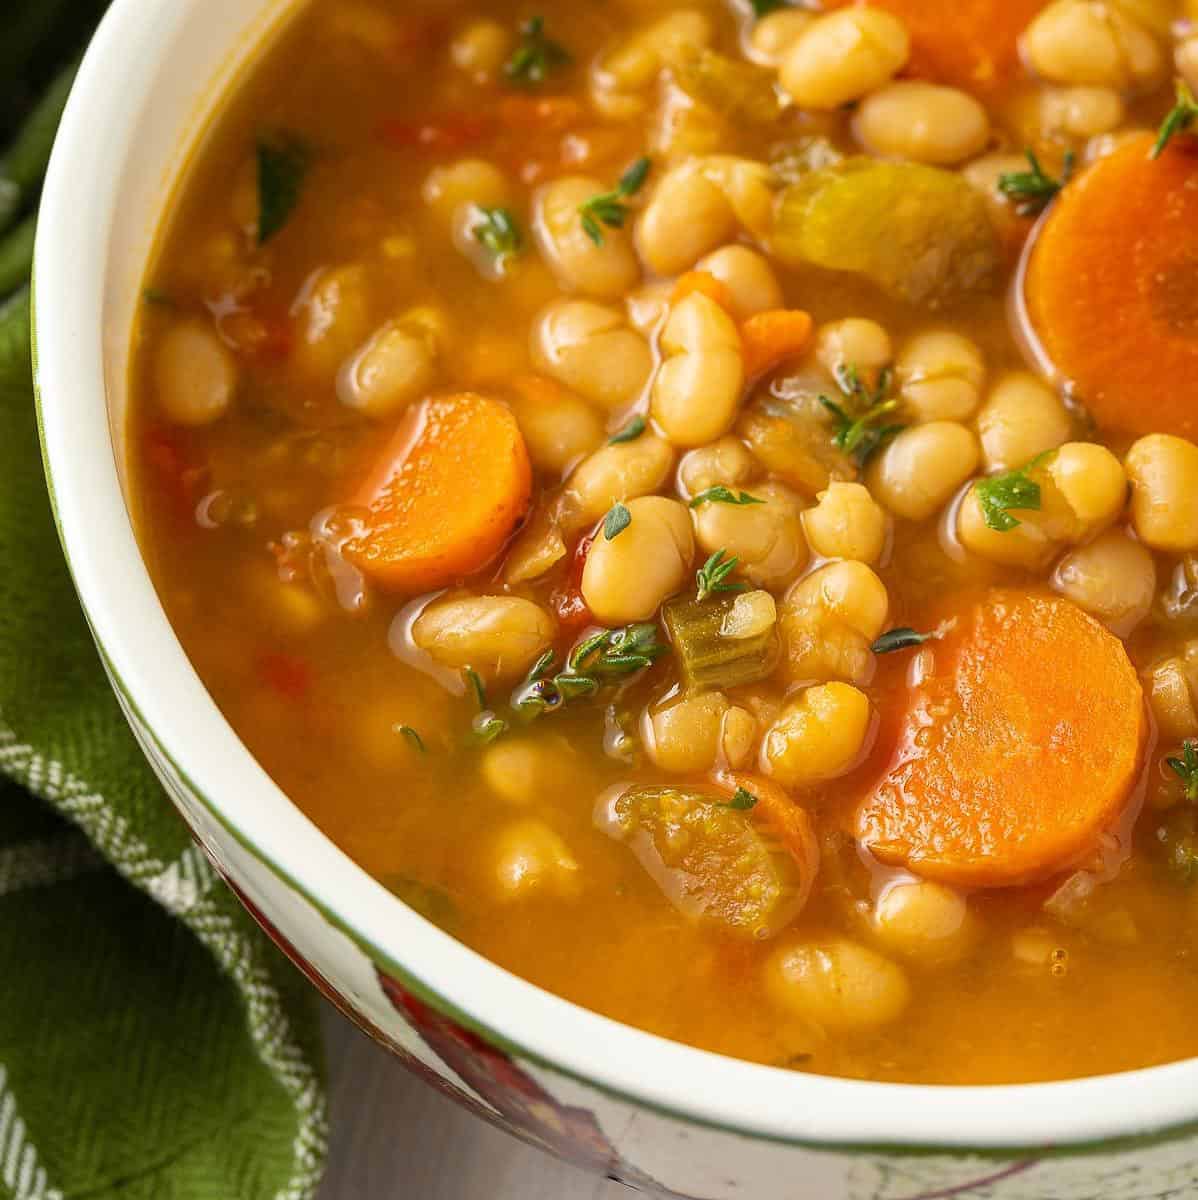  This Vegan Navy Bean Soup is packed with protein and flavor.